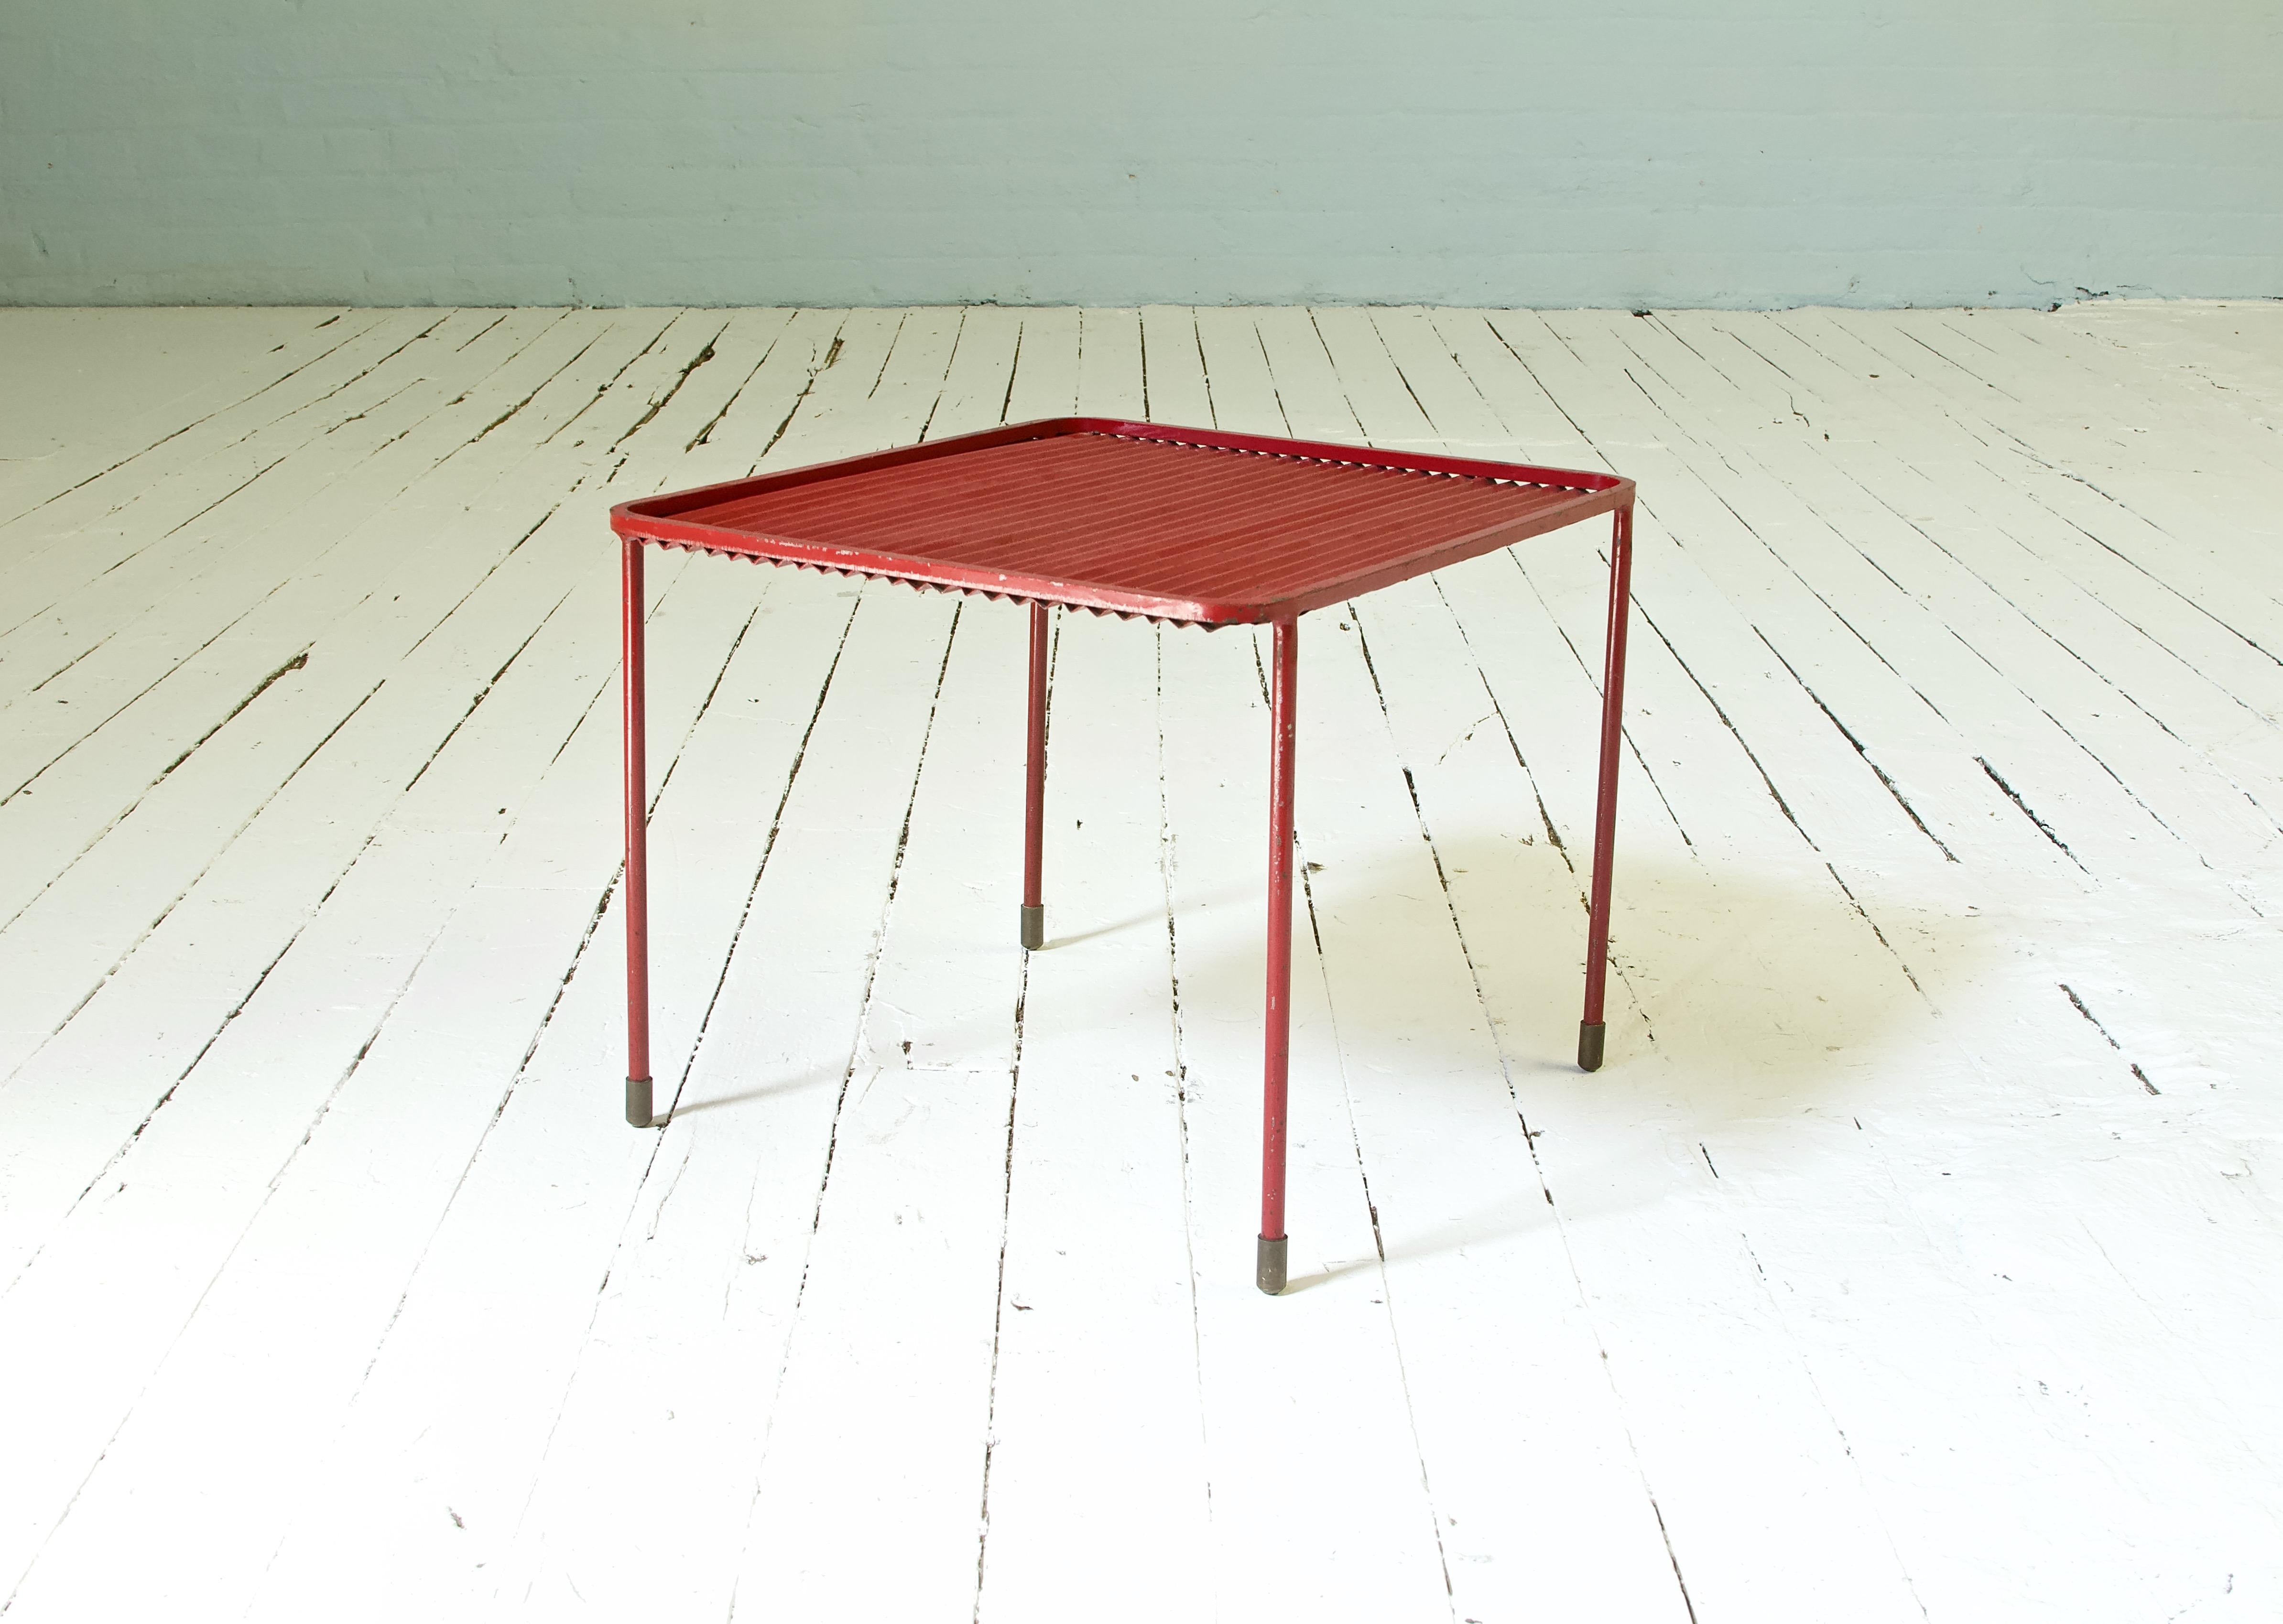 A fun little accent table in corrugated steel with brass sabots in well-preserved, bright primary red. Classic modernist usage of Industrial materials, simple lines, clean metalwork, and good proportions. This petite piece could function as an ad